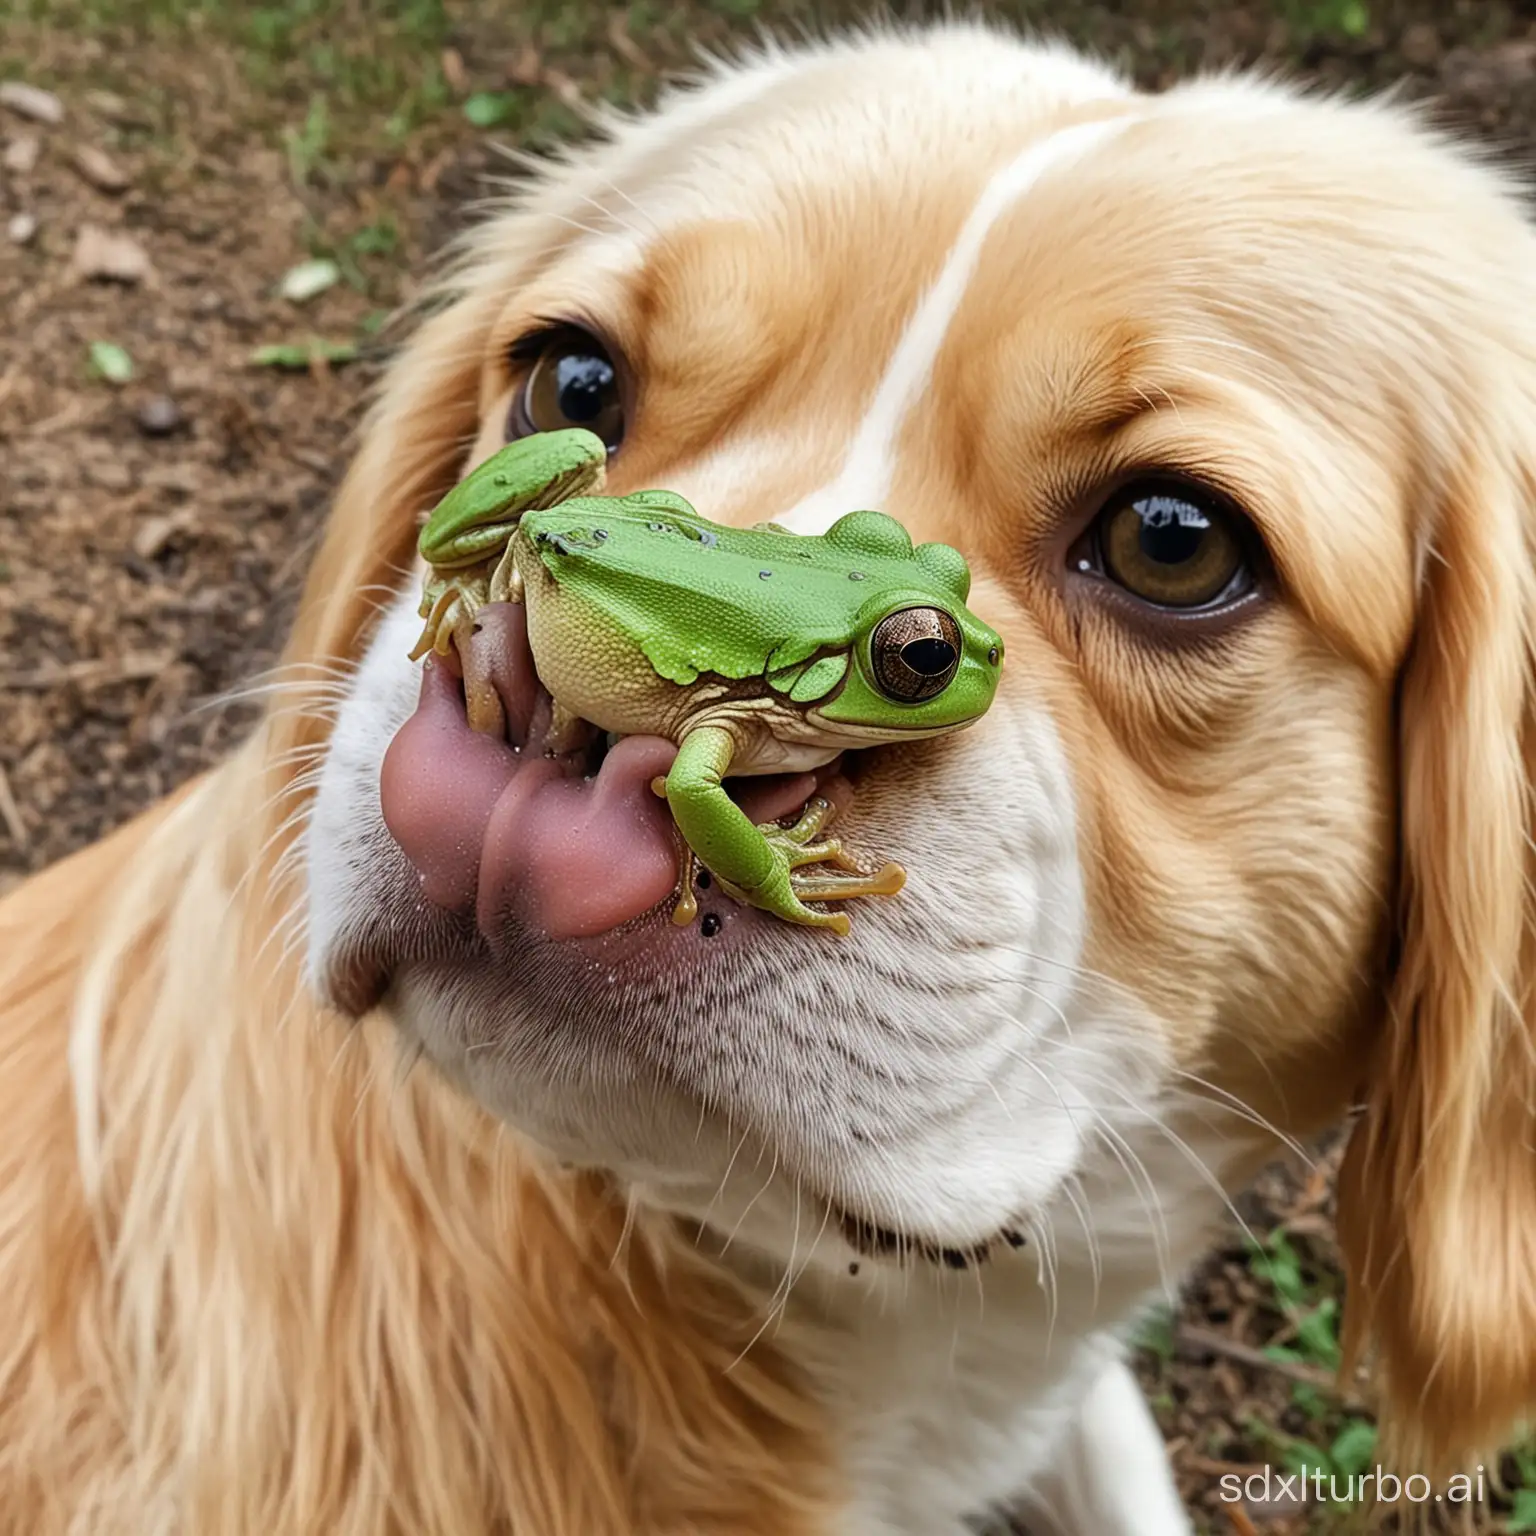 Frog-Perched-on-Playful-Dogs-Nose